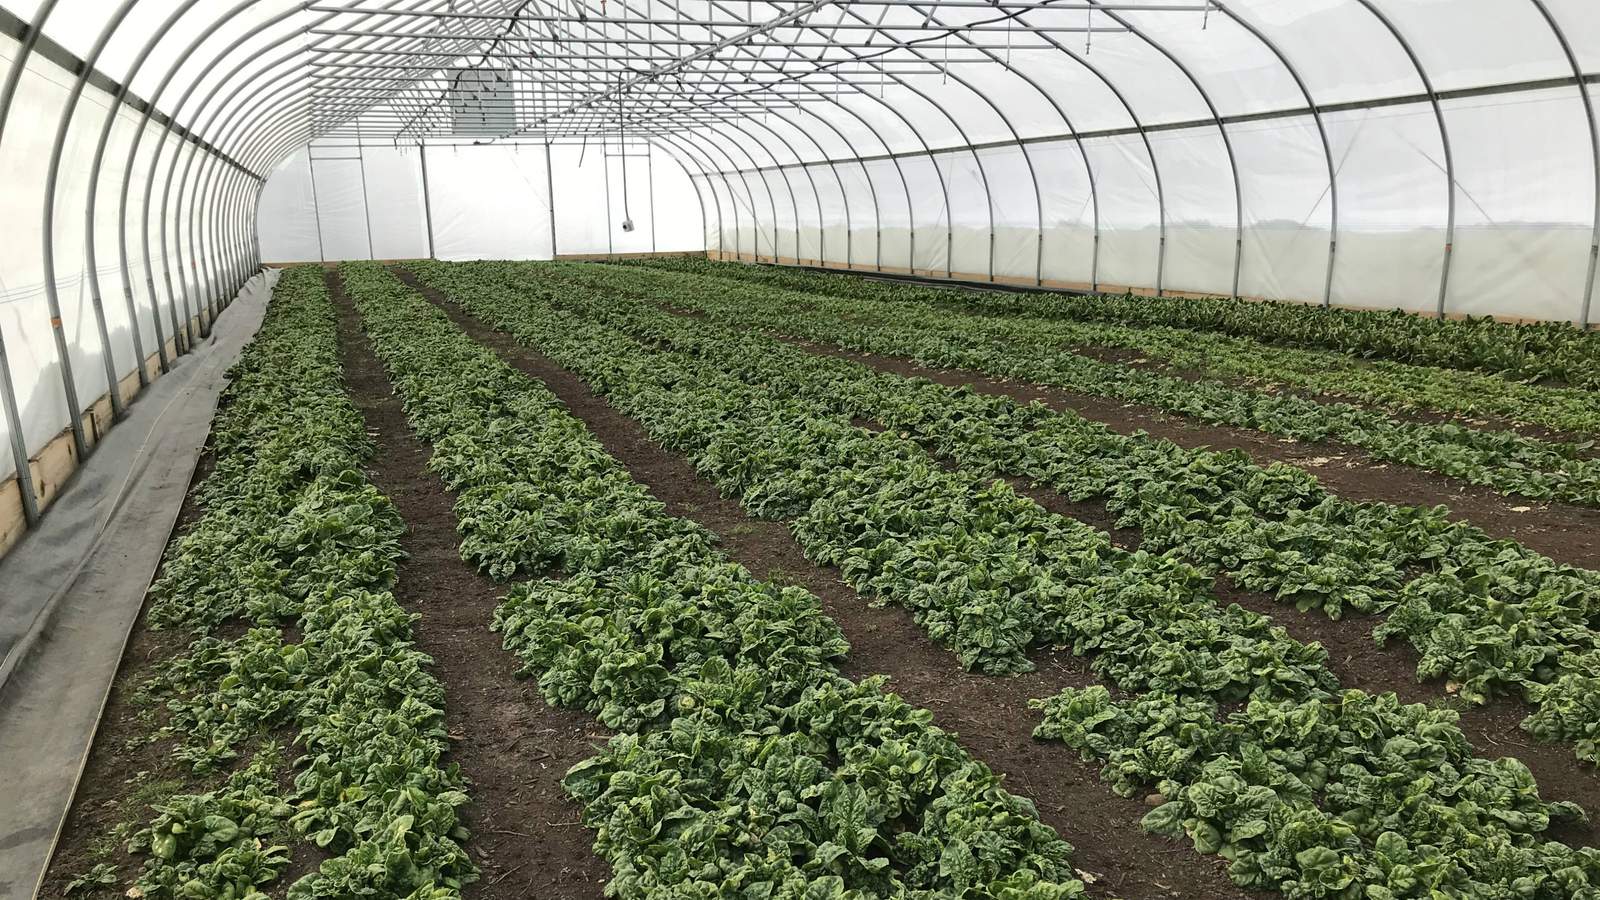 U-M Campus Farm hiring for two positions in Ann Arbor